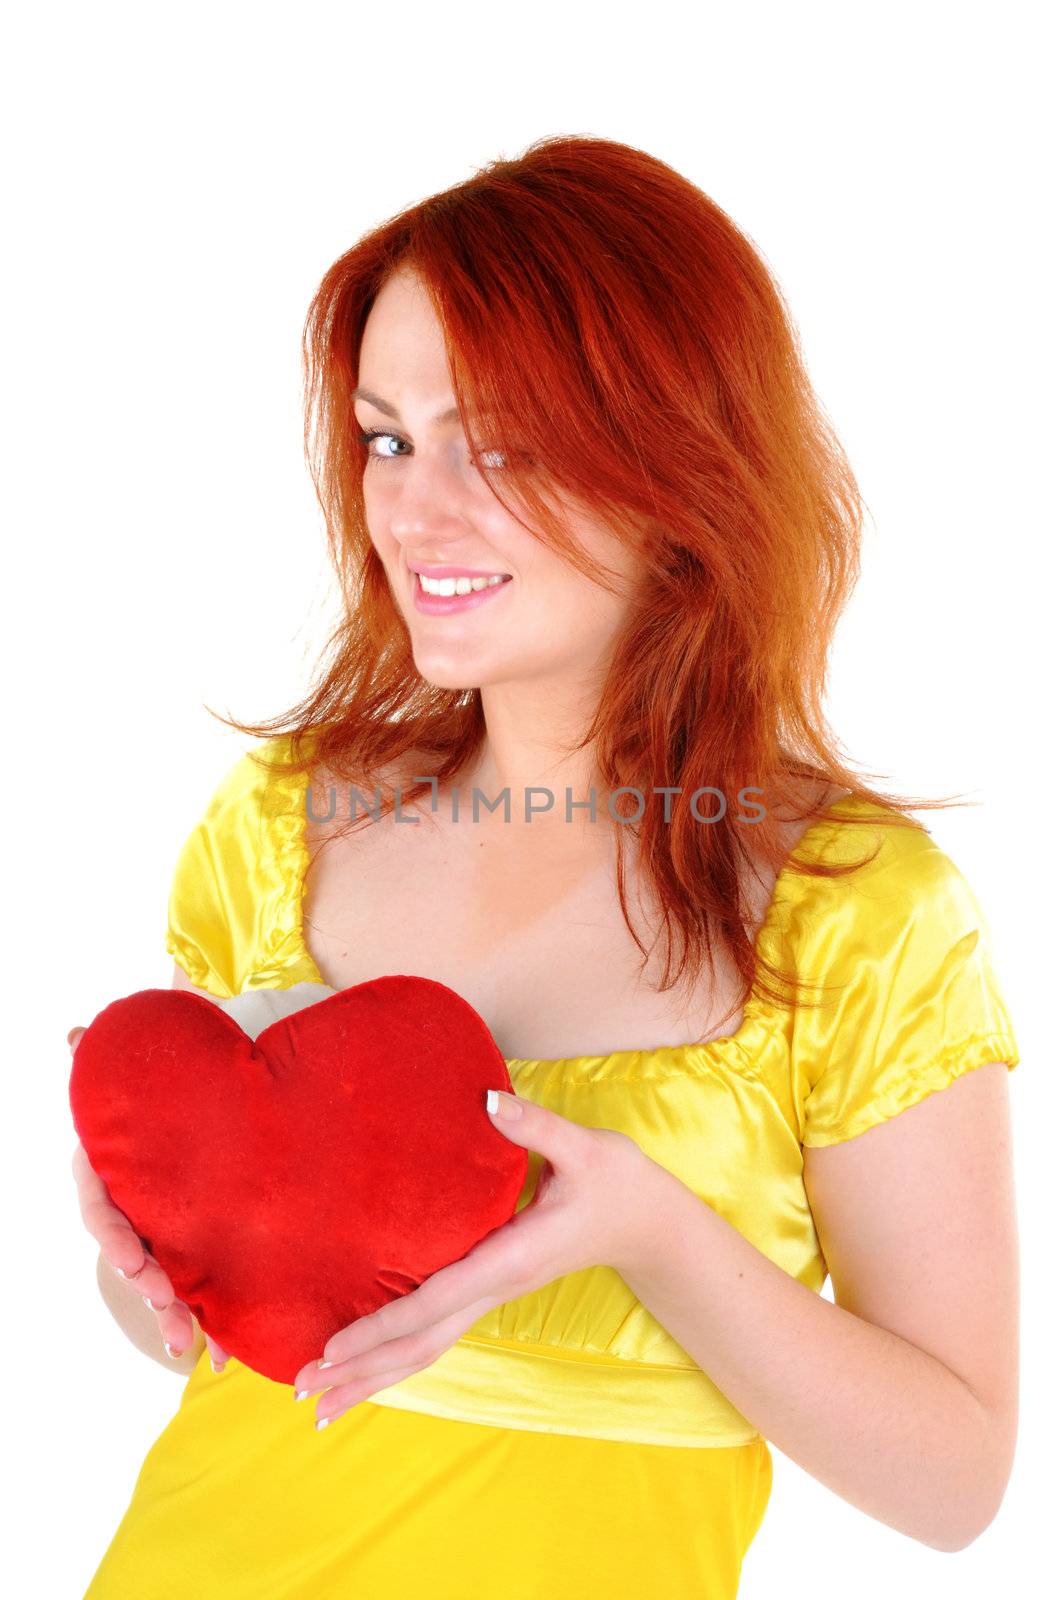 Young beautiul woman with red heart in her hands on white background. Focus on woman's eyes.